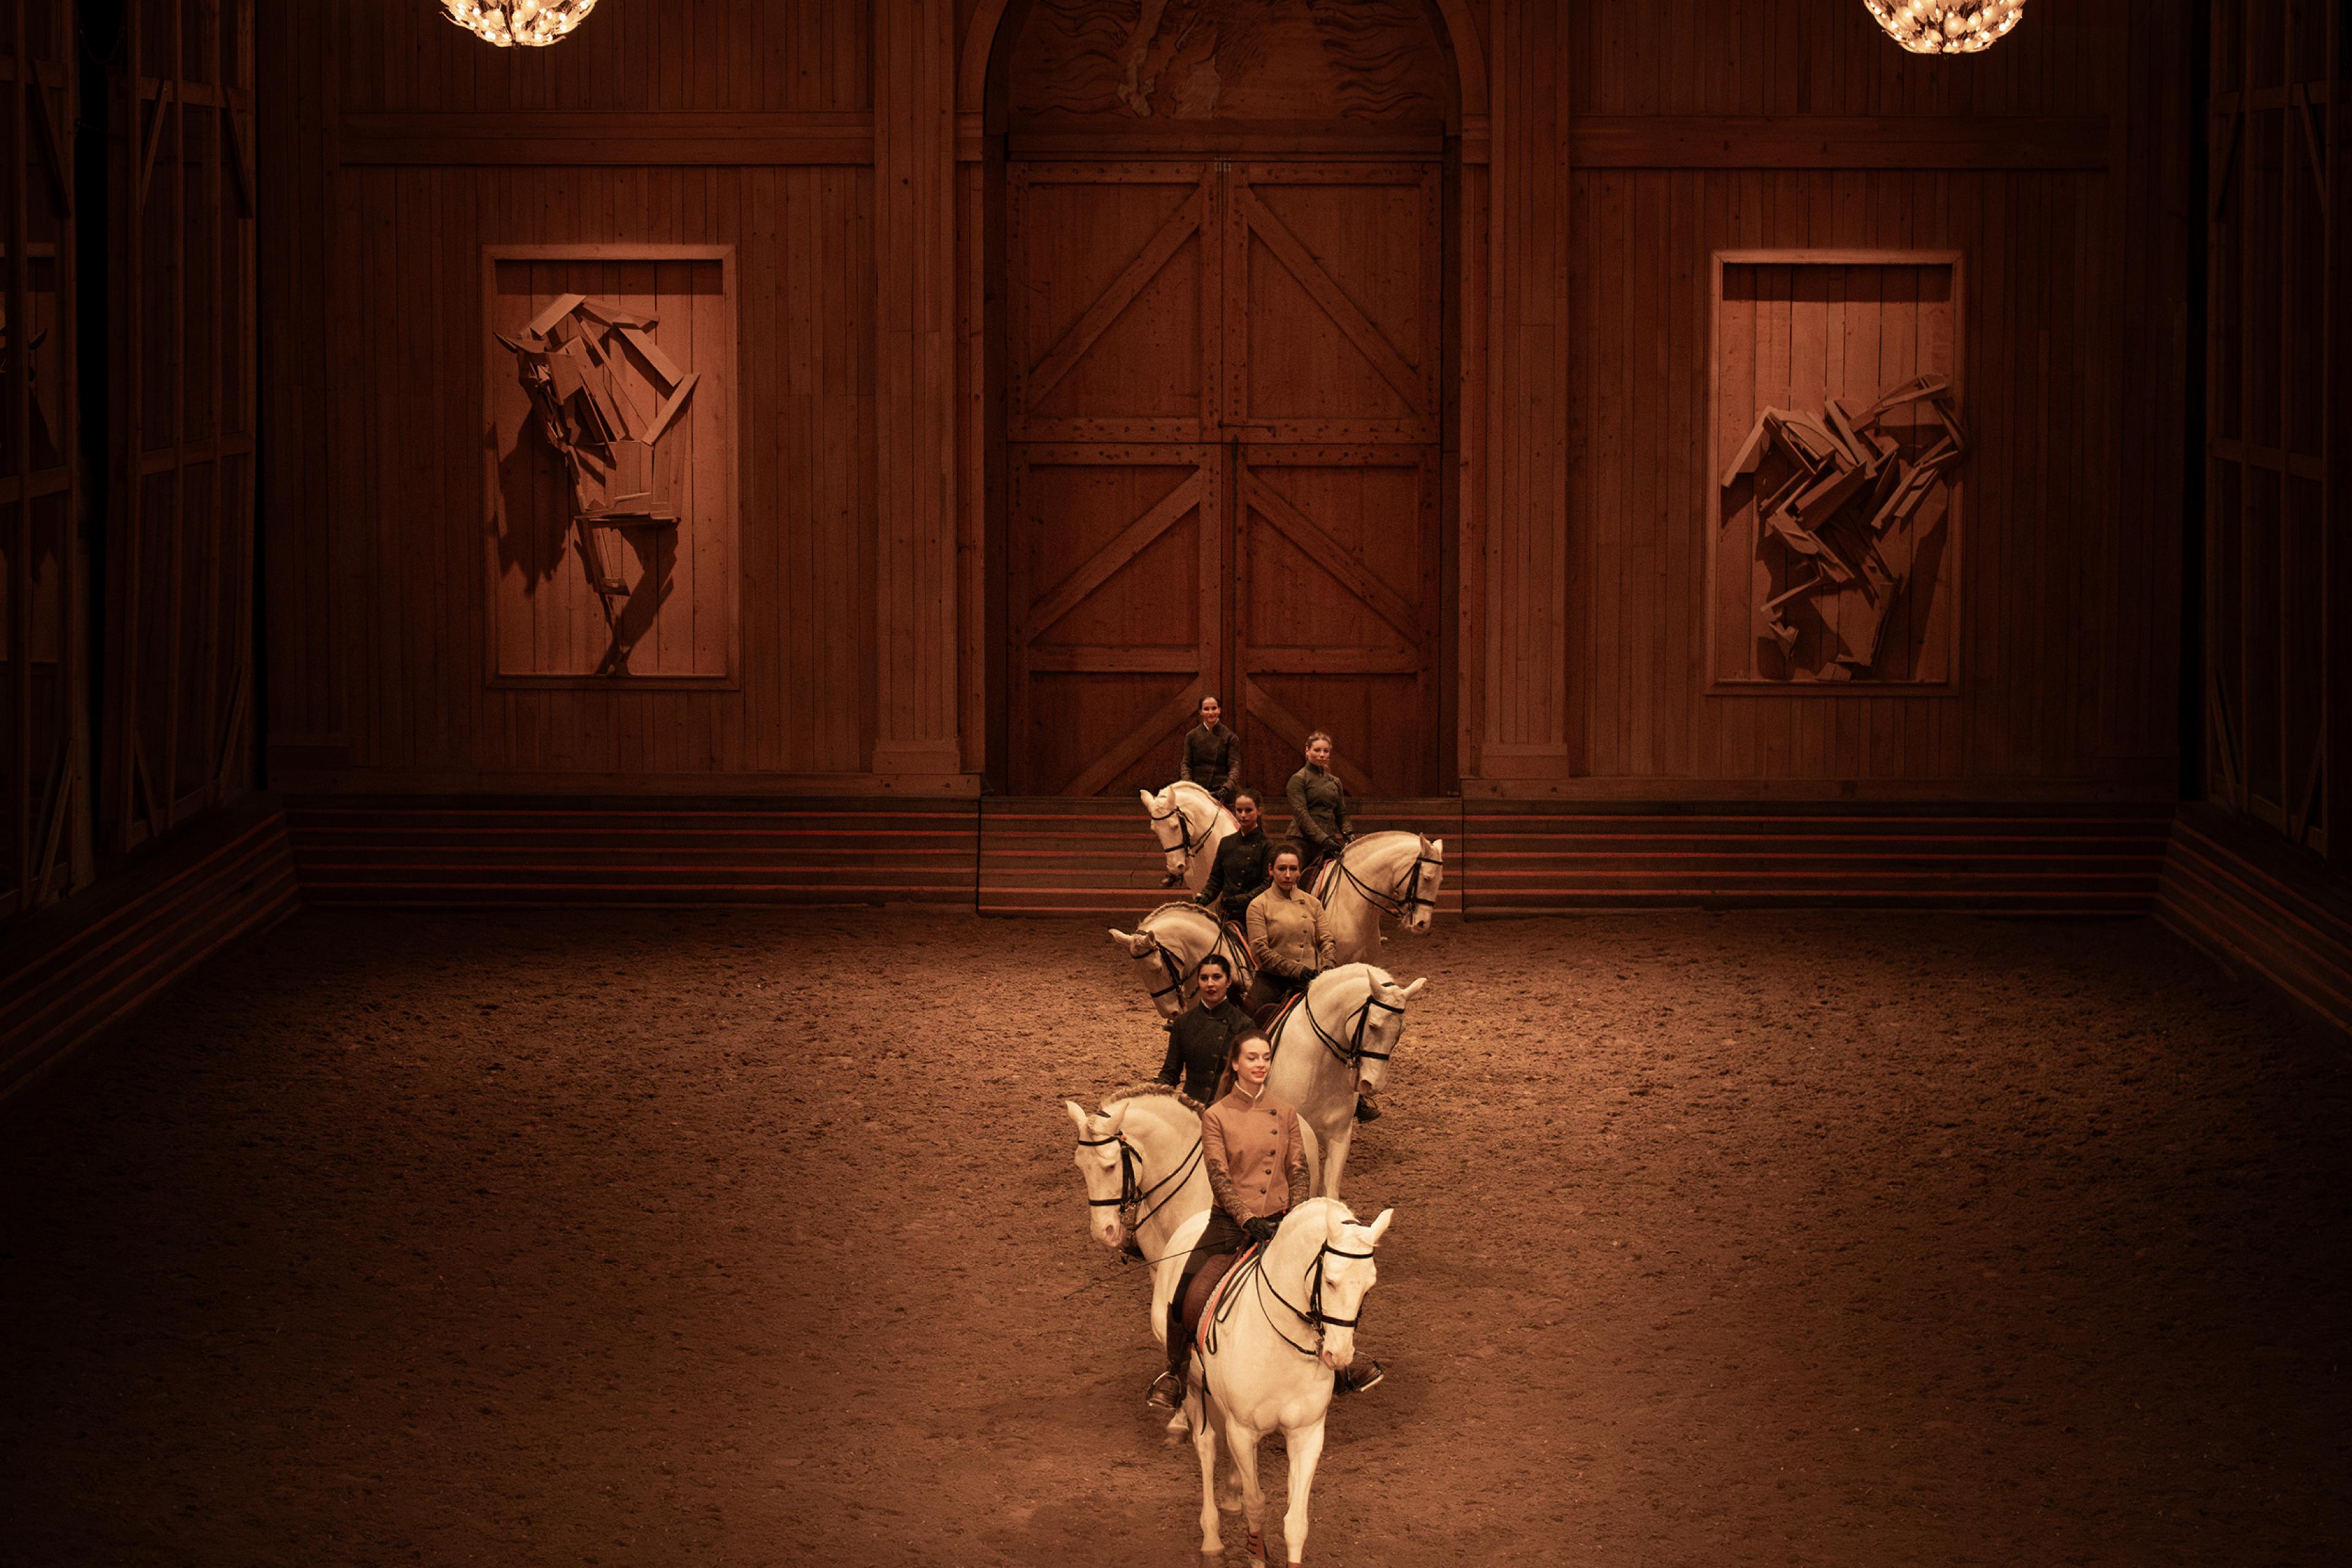 horses being ridden in a single file line inside an indoor arena with sand floor